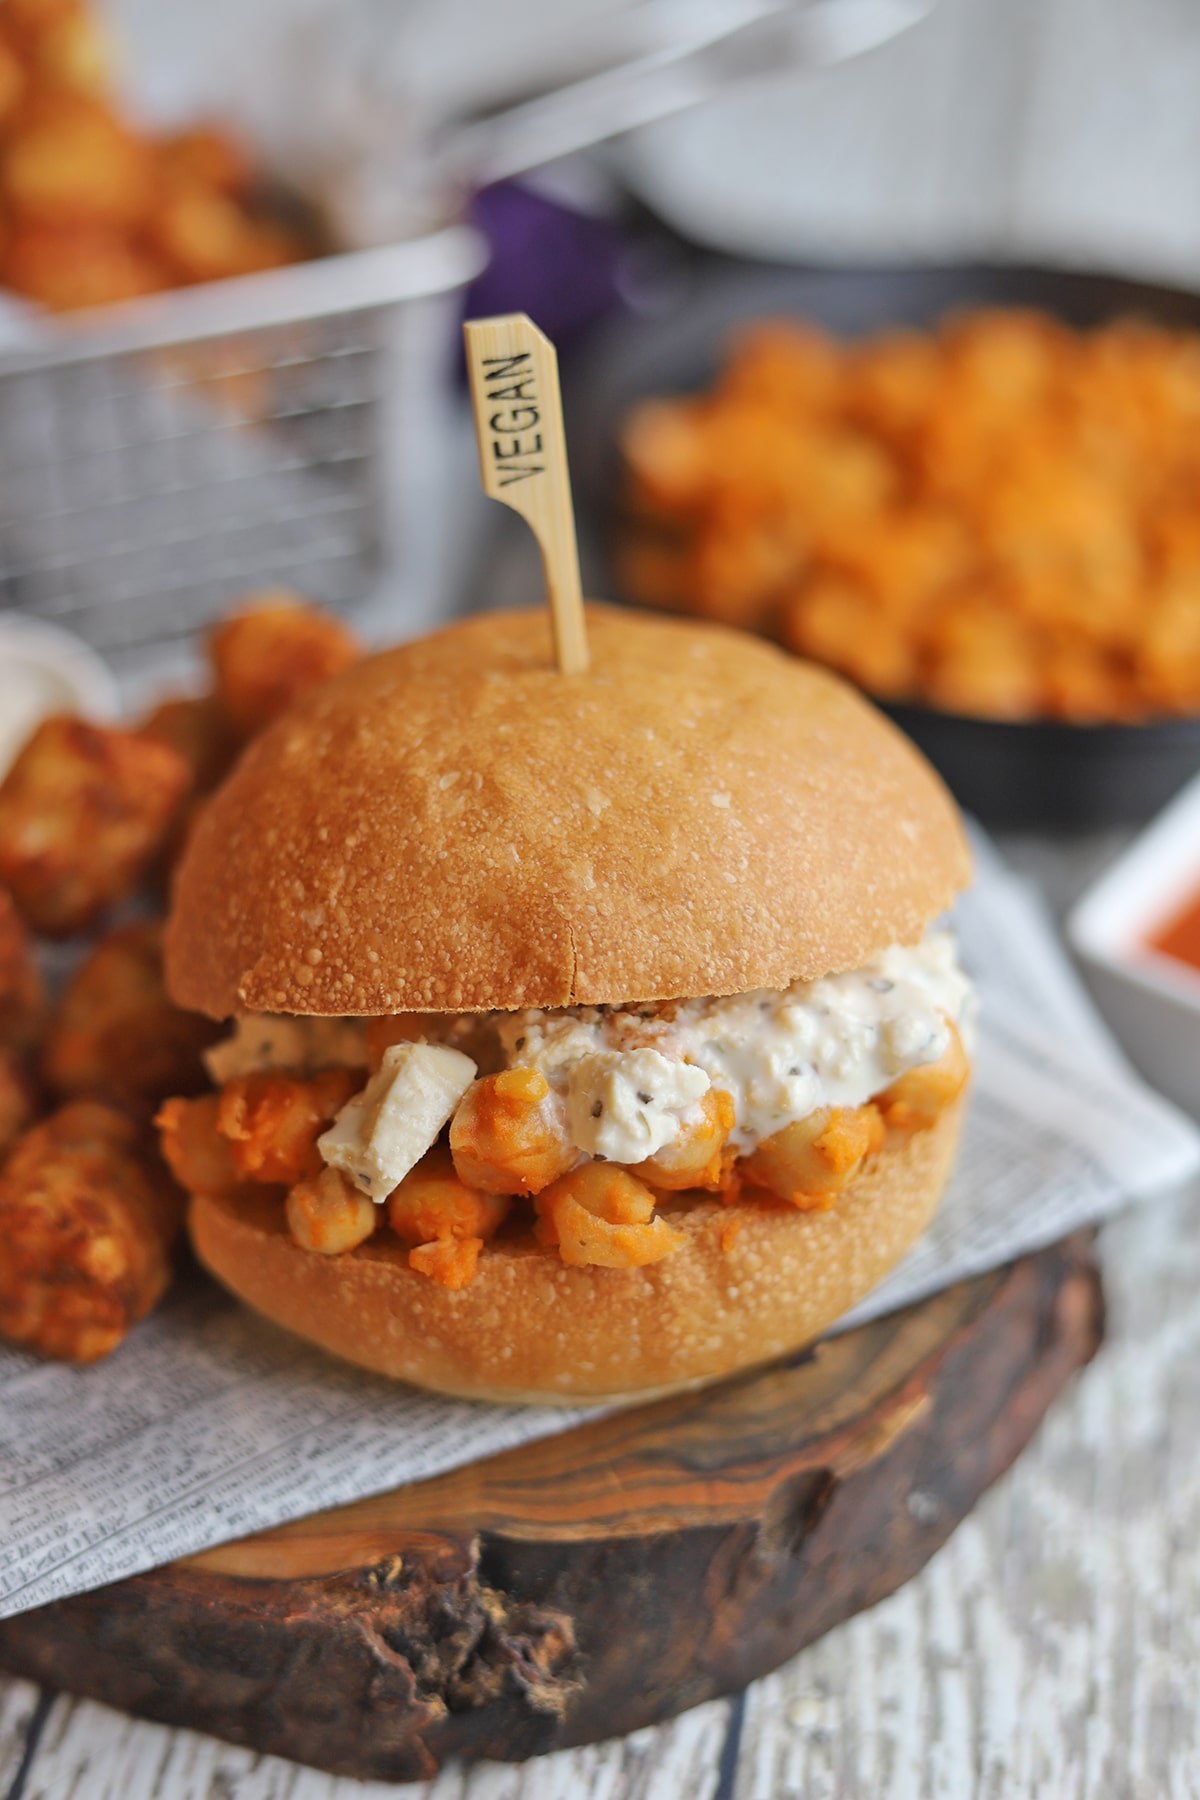 Buffalo chickpea sandwich topped with vegan blue cheese dressing.